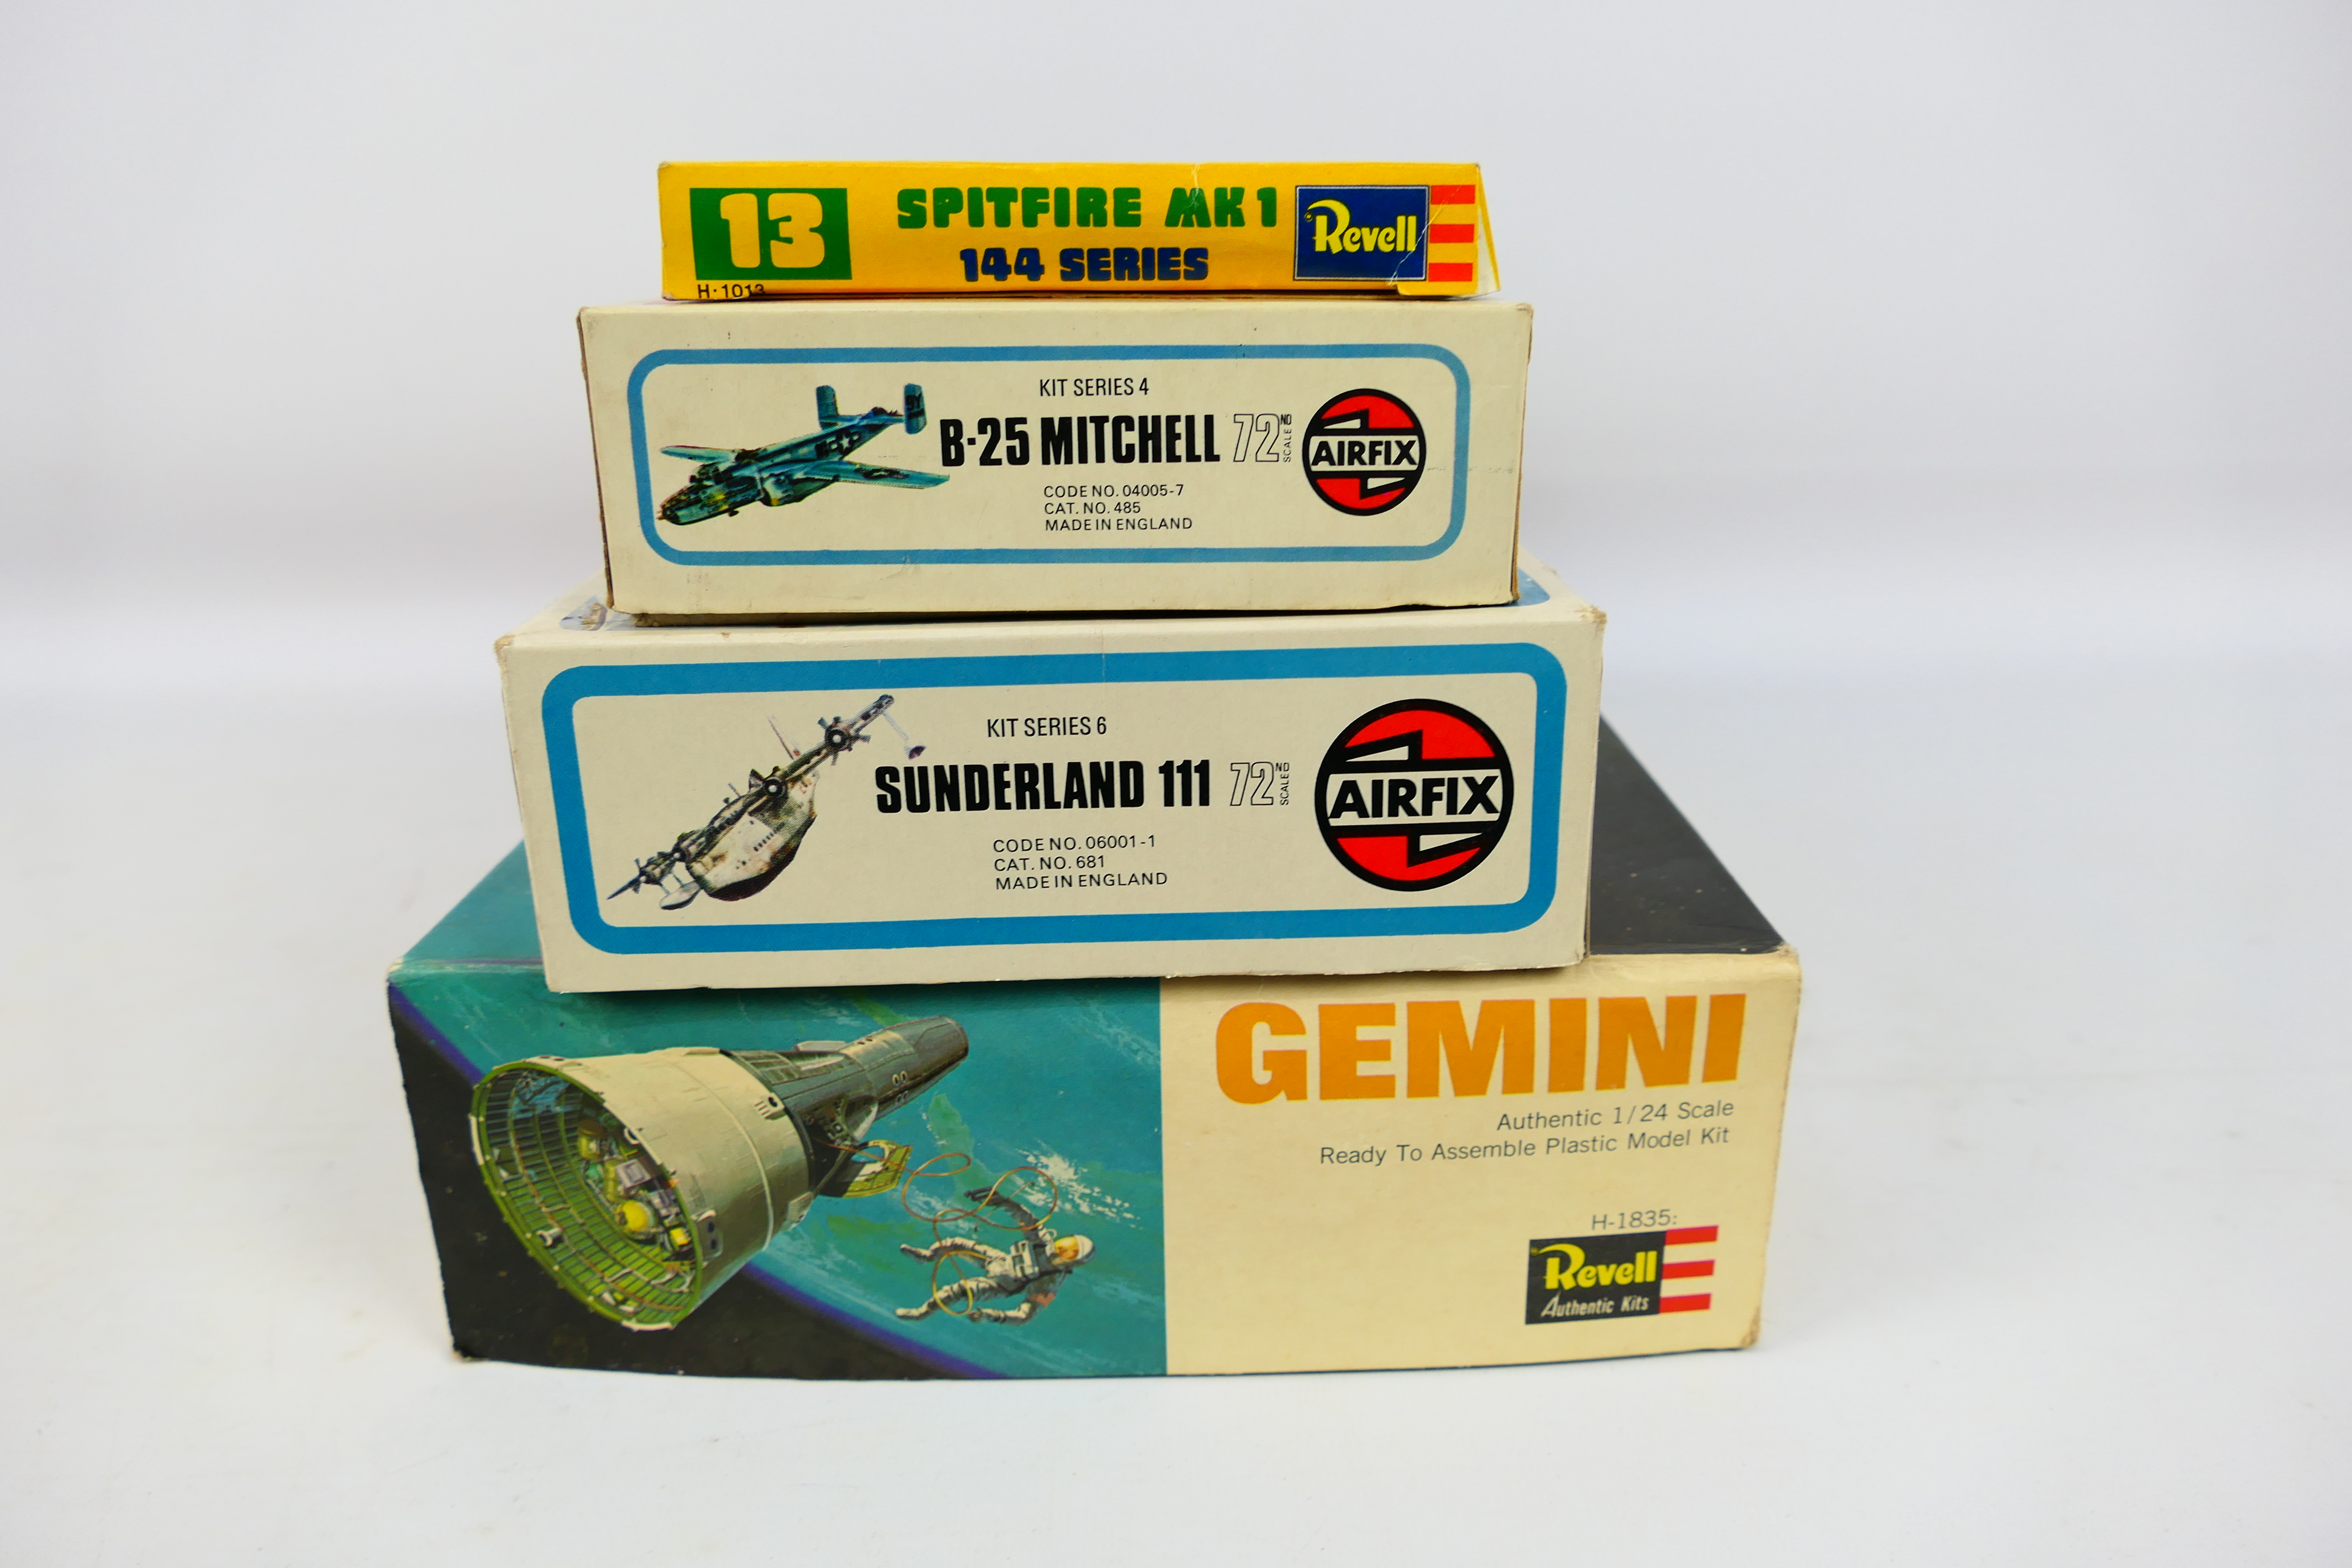 Airfix - Revell - Matchbox - 4 x vintage model kits including Gemini space capsule in 1:24 scale # - Image 11 of 12